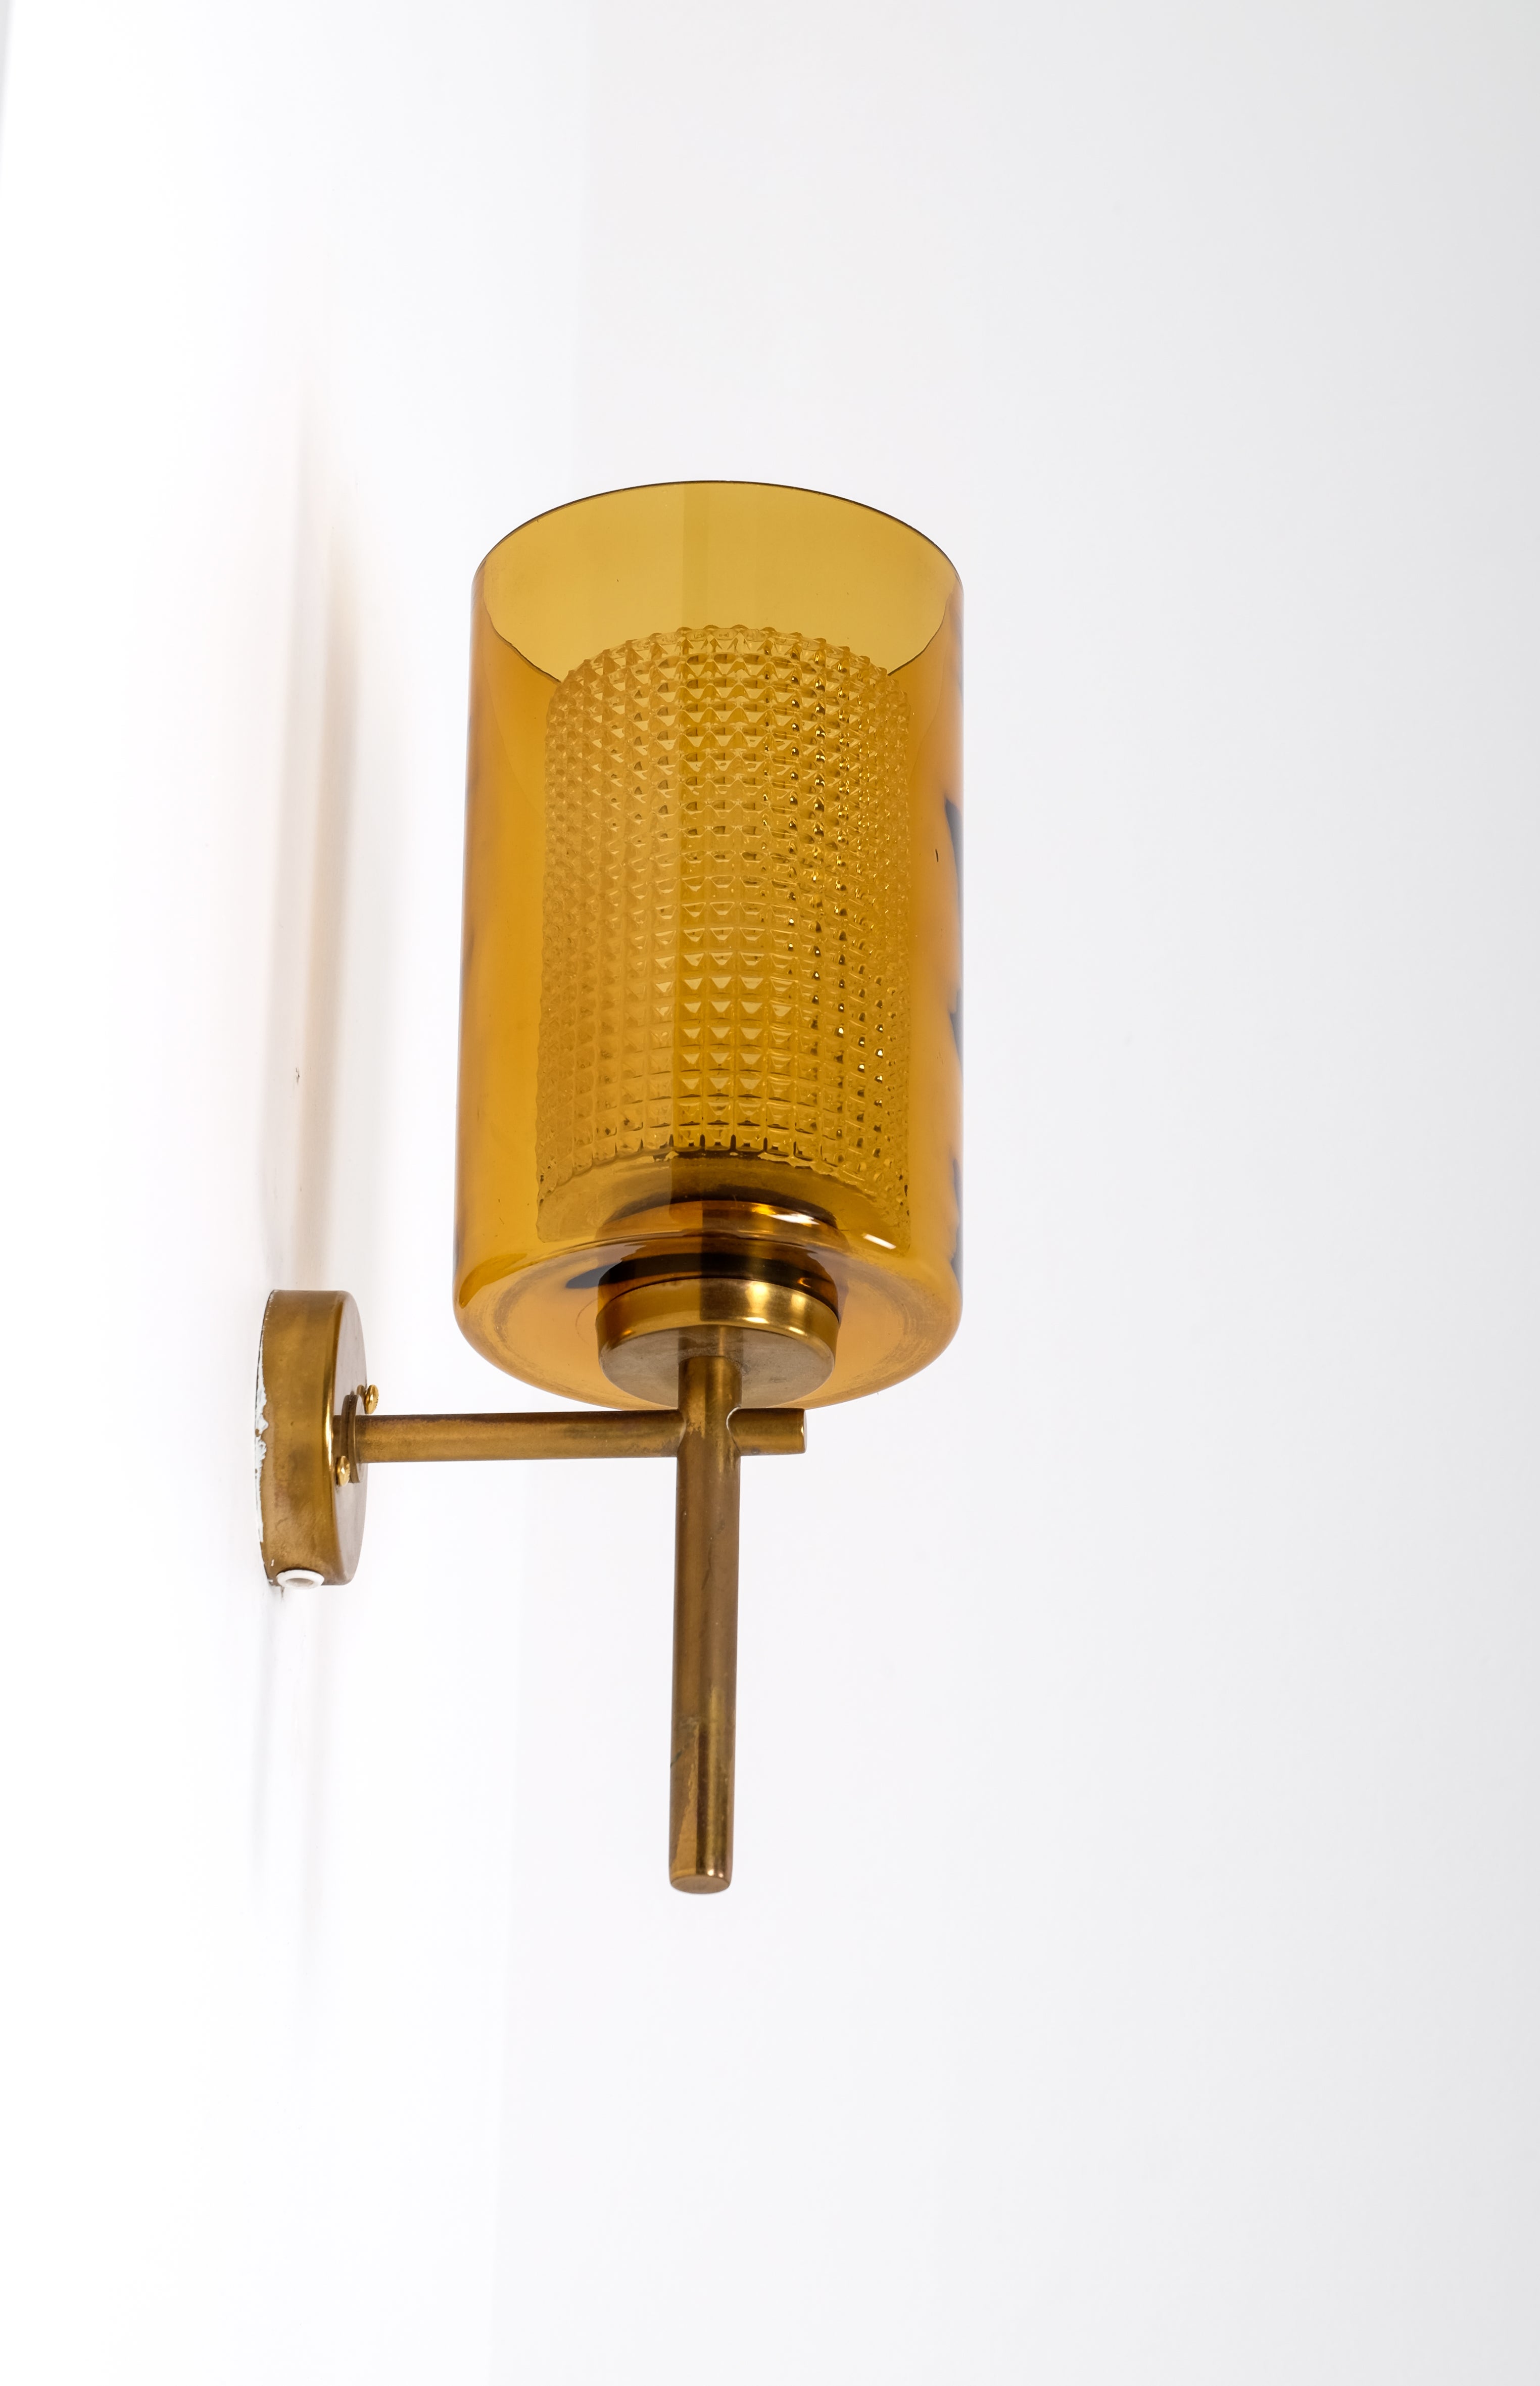 Set of 3 brass and glass wall lights, produced in Sweden, 1950s. 
Please note: Listed price is for one (1) wall light.
